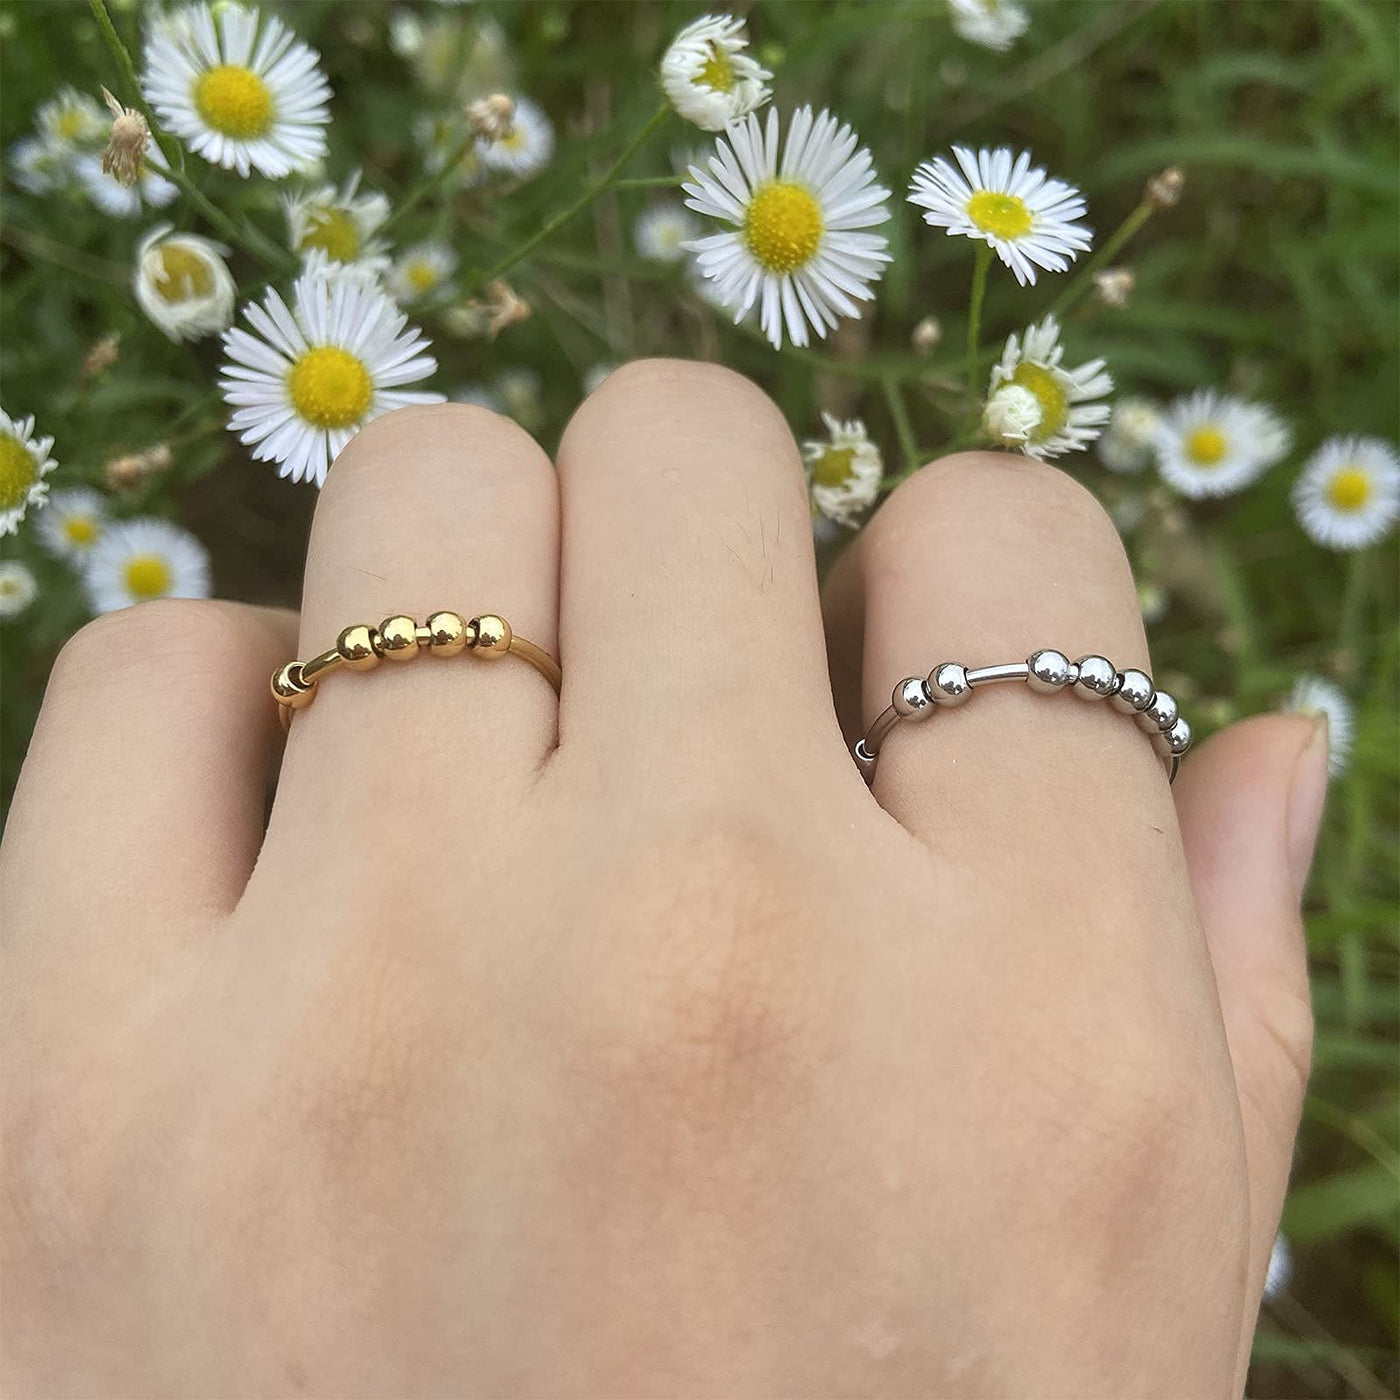 anxiety relief rings – Calm Collective